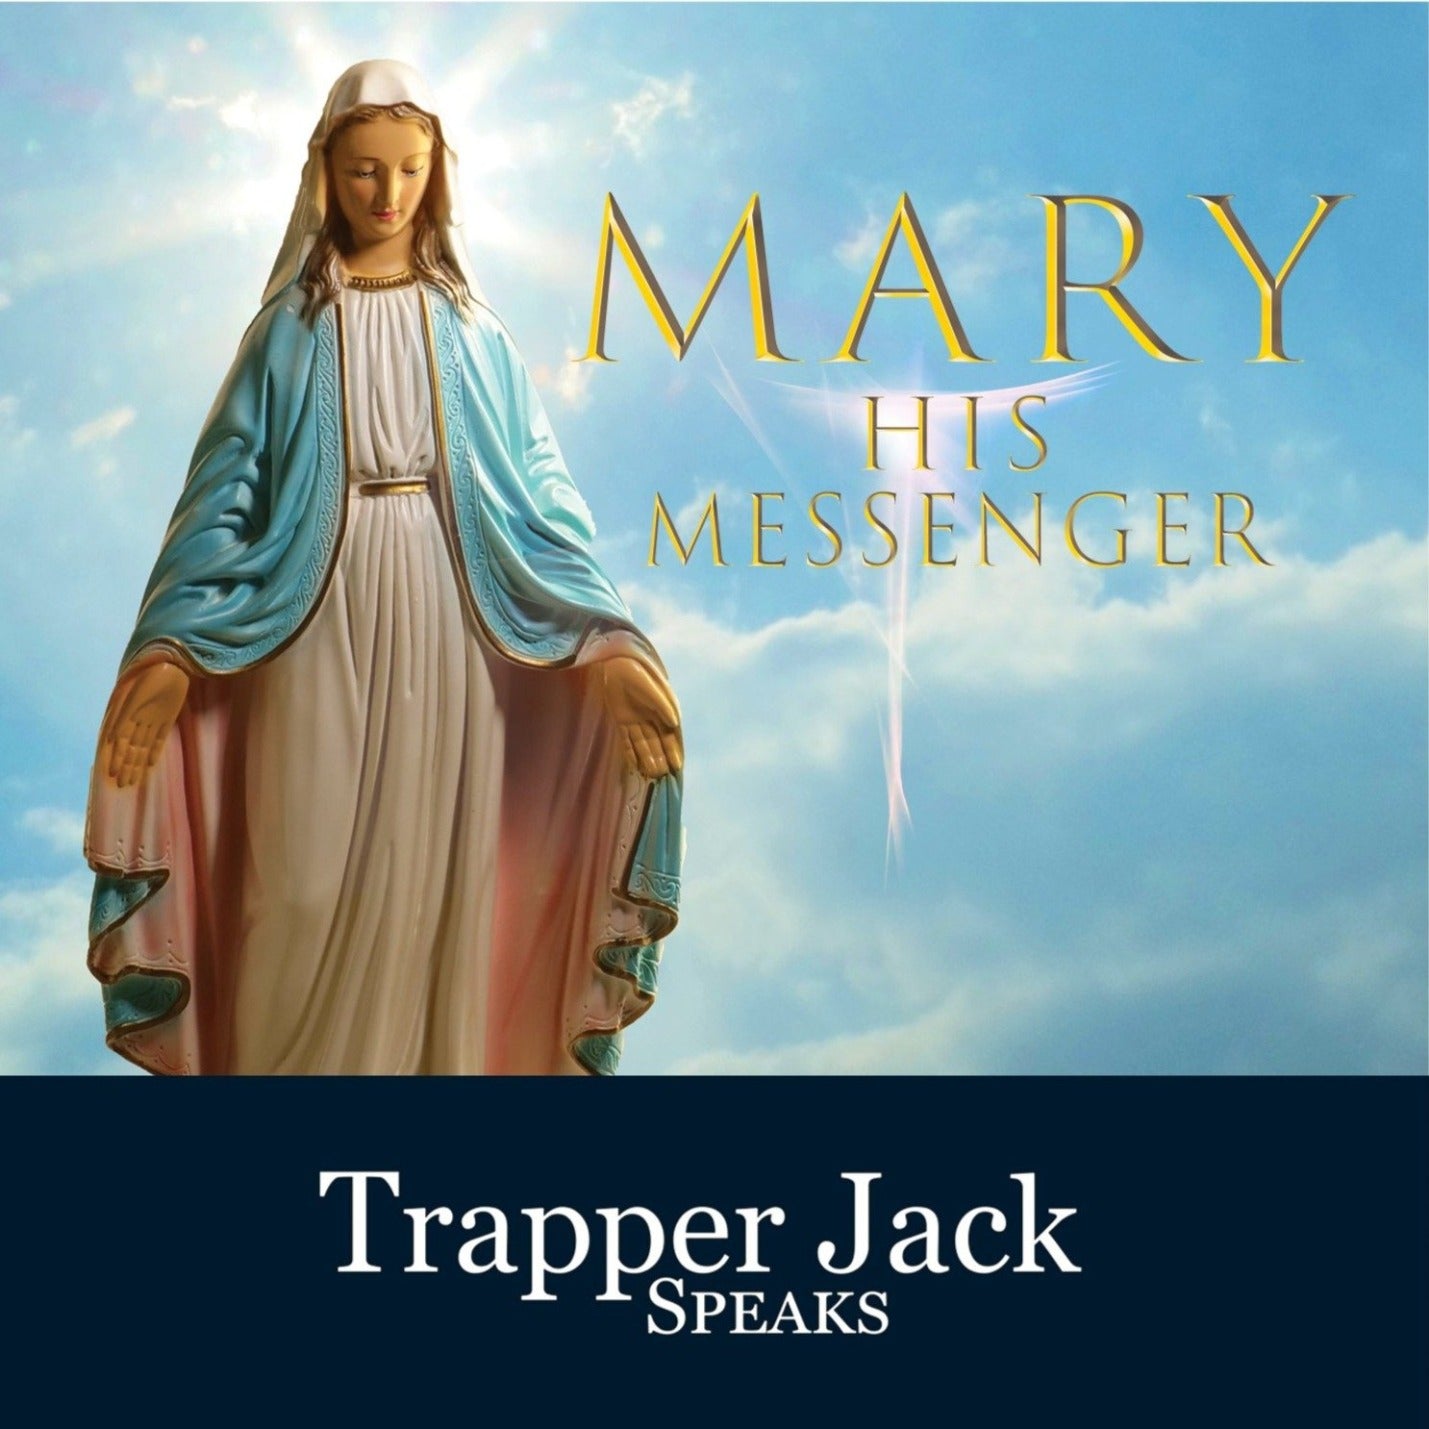 MARY His Messenger CD Cover